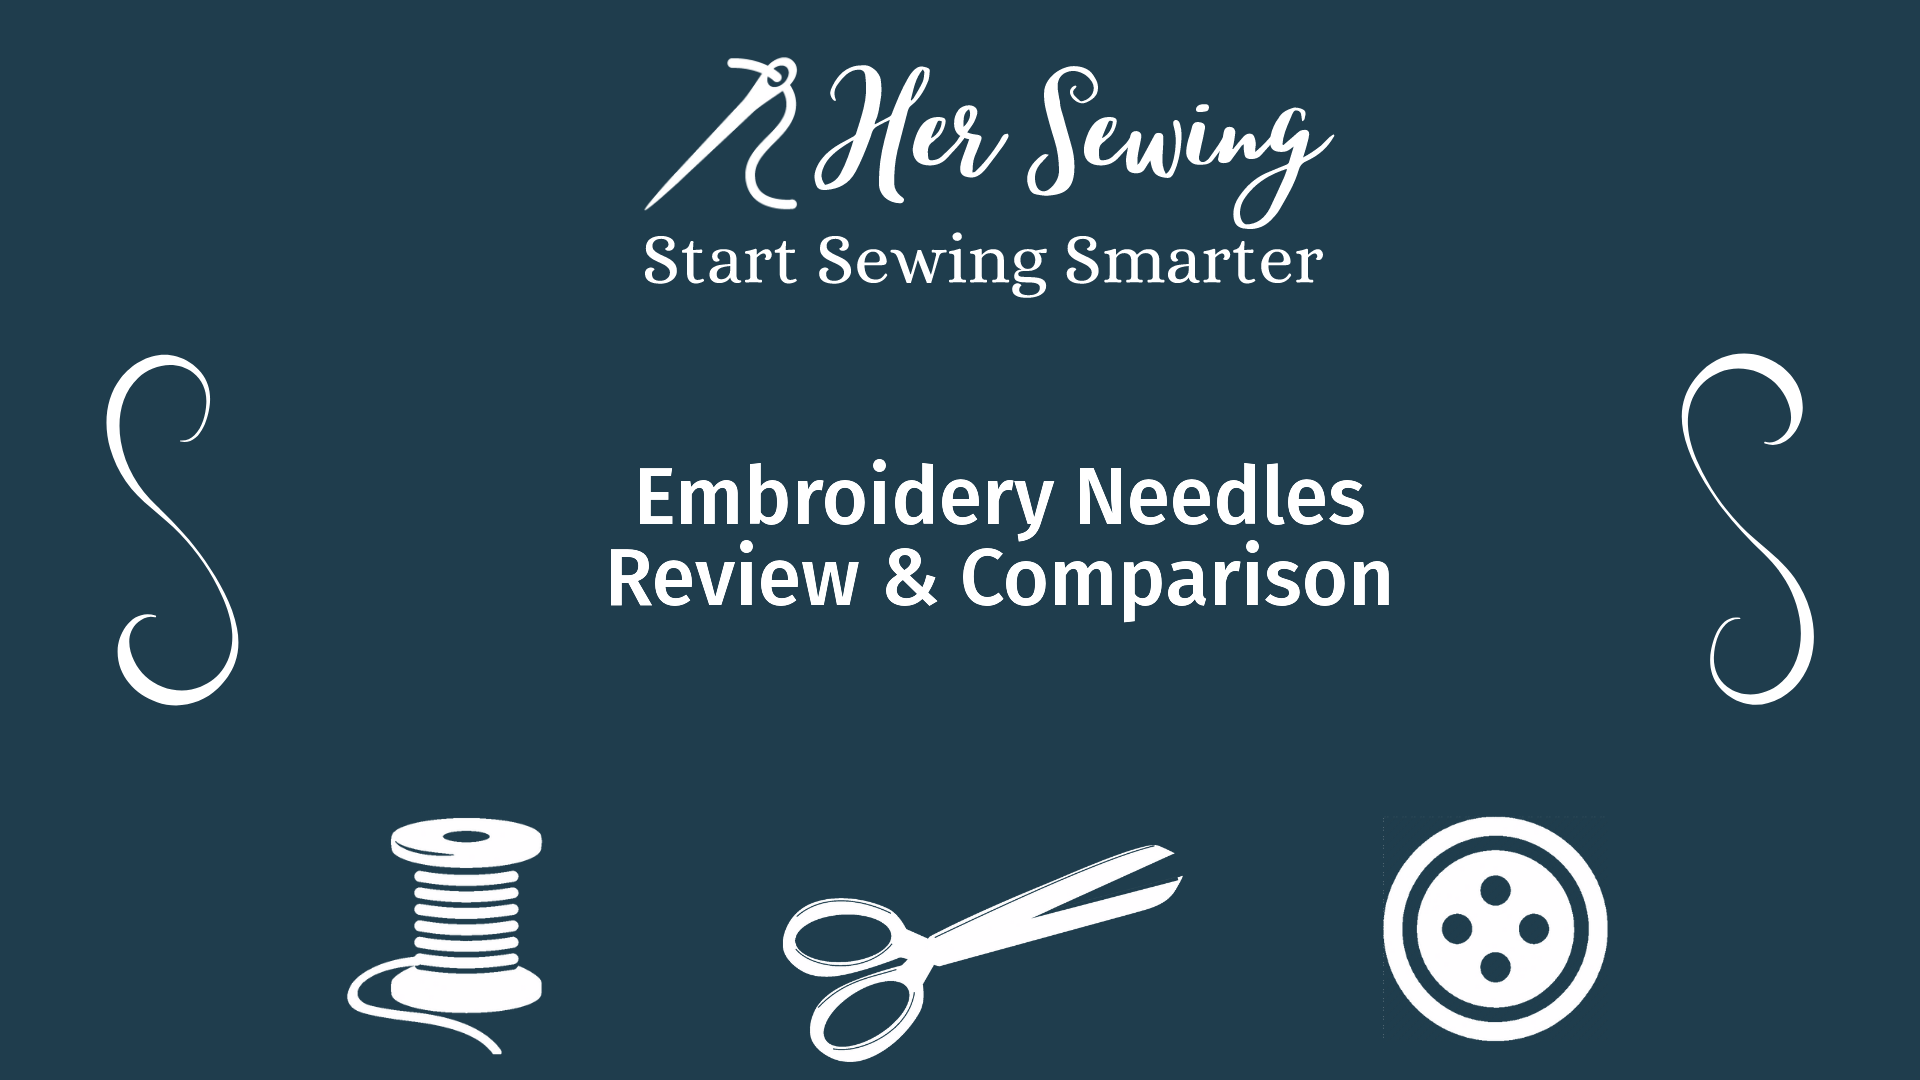 Embroidery Needles Review & Comparison